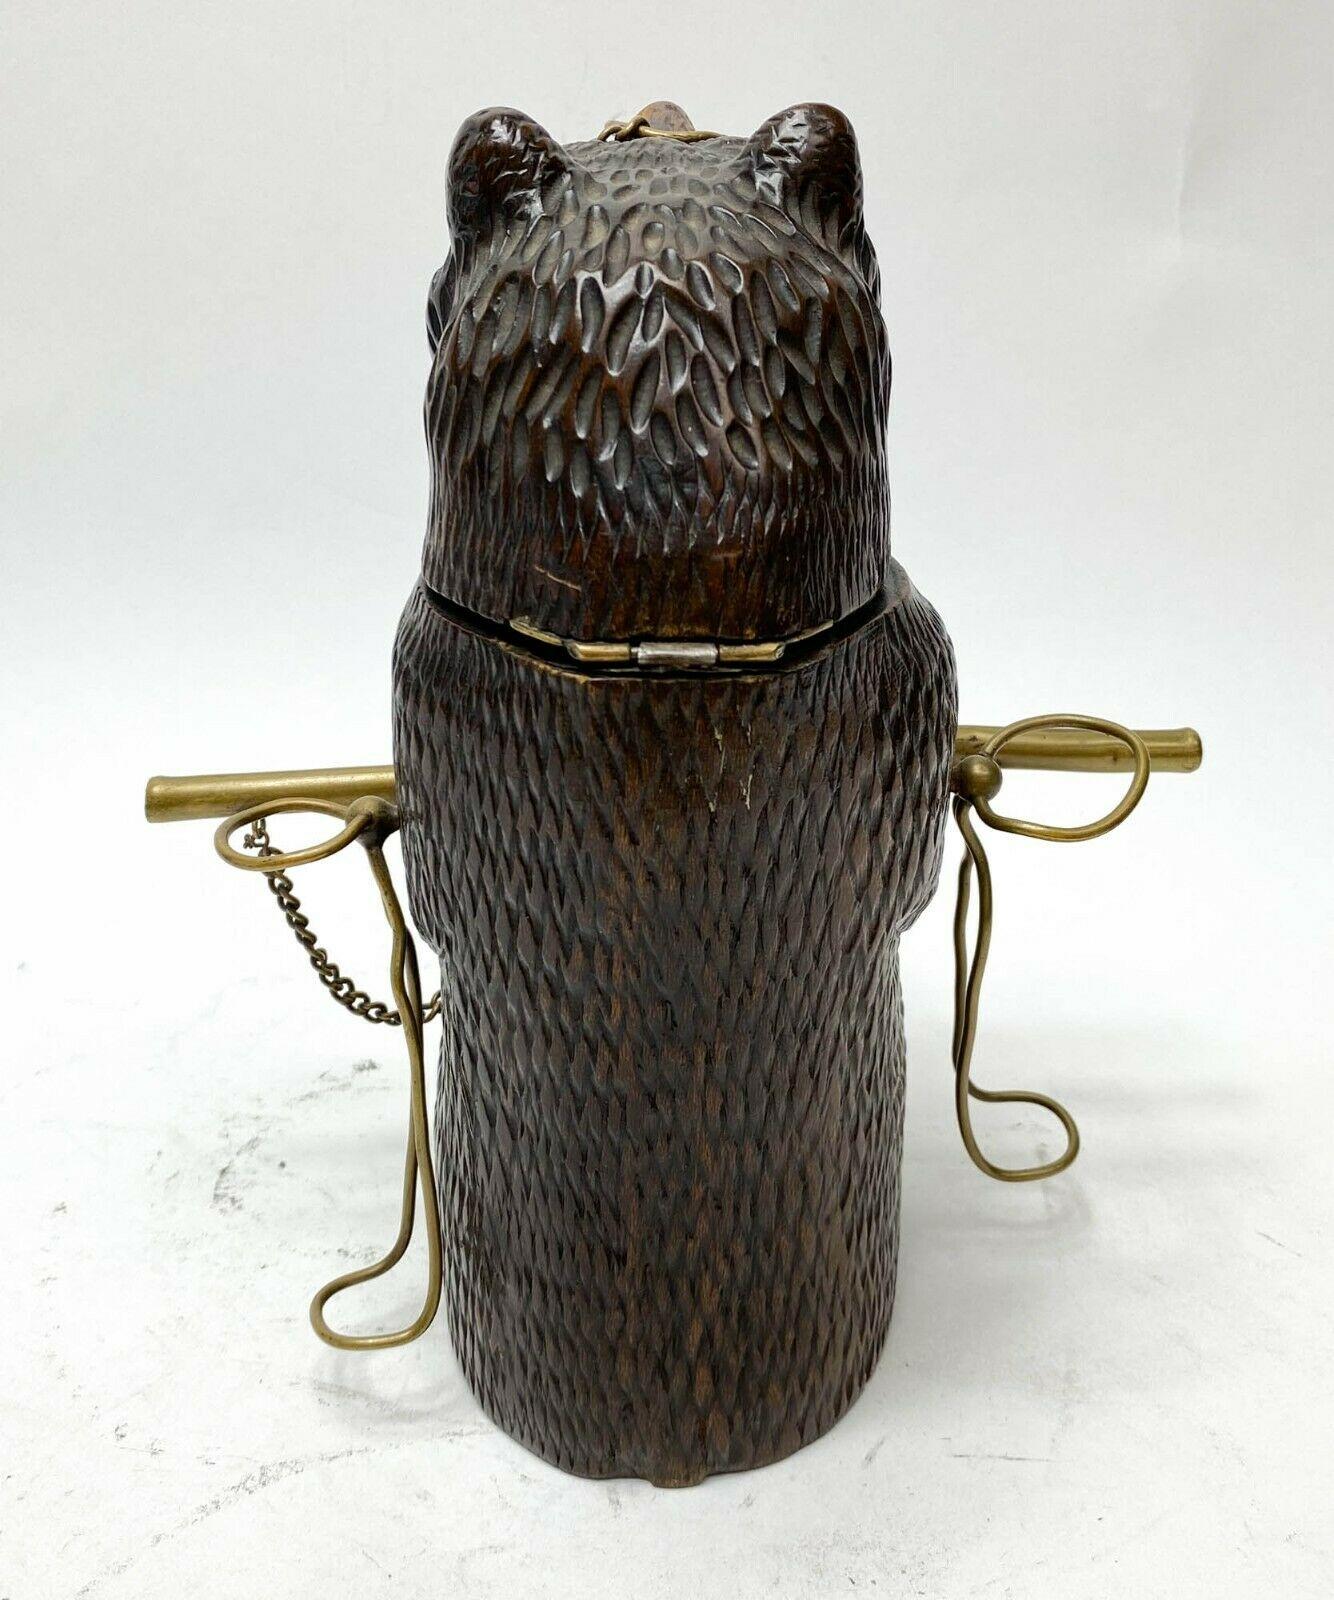 Hand carved figural bear Tobacco and Pipe stand, c1900

Stand modeled as a bear pipe and tobacco stand with 3 holders for pipes. The head opening container for tobacco. Likely a black forest bear. 

Additional information:
Dimension: 8.8 in. x